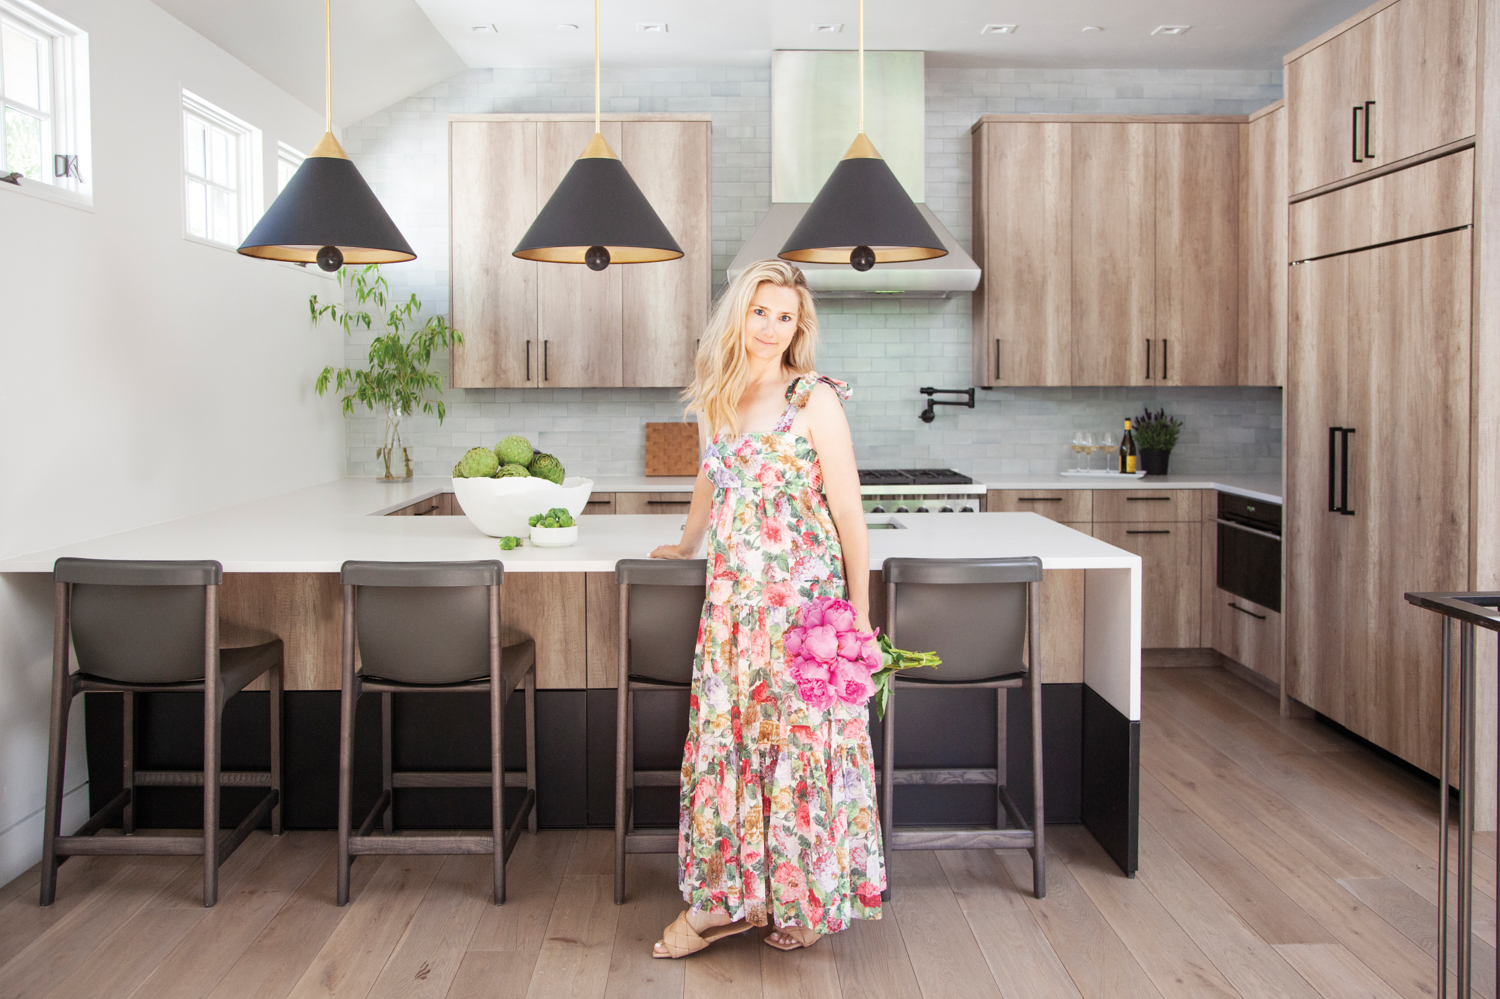 Kristin Dittmar standing by a kitchen island holding a bouquet of peonies